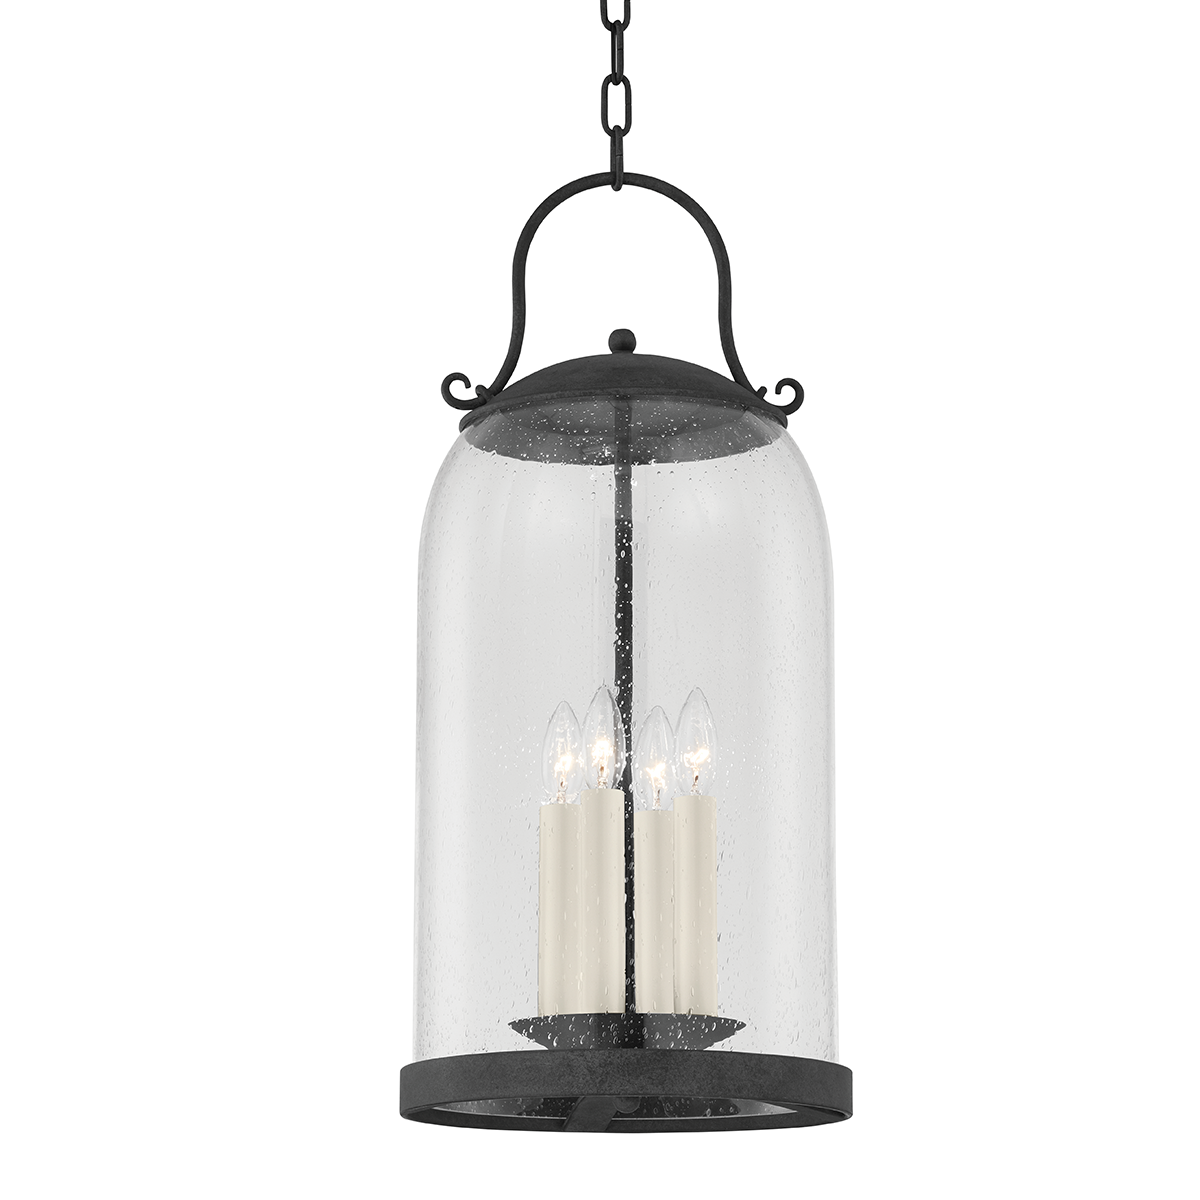 Troy Lighting 4 LIGHT LARGE EXTERIOR PENDANT F5186 Outdoor Light Fixture l Hanging Troy Lighting FRENCH IRON  